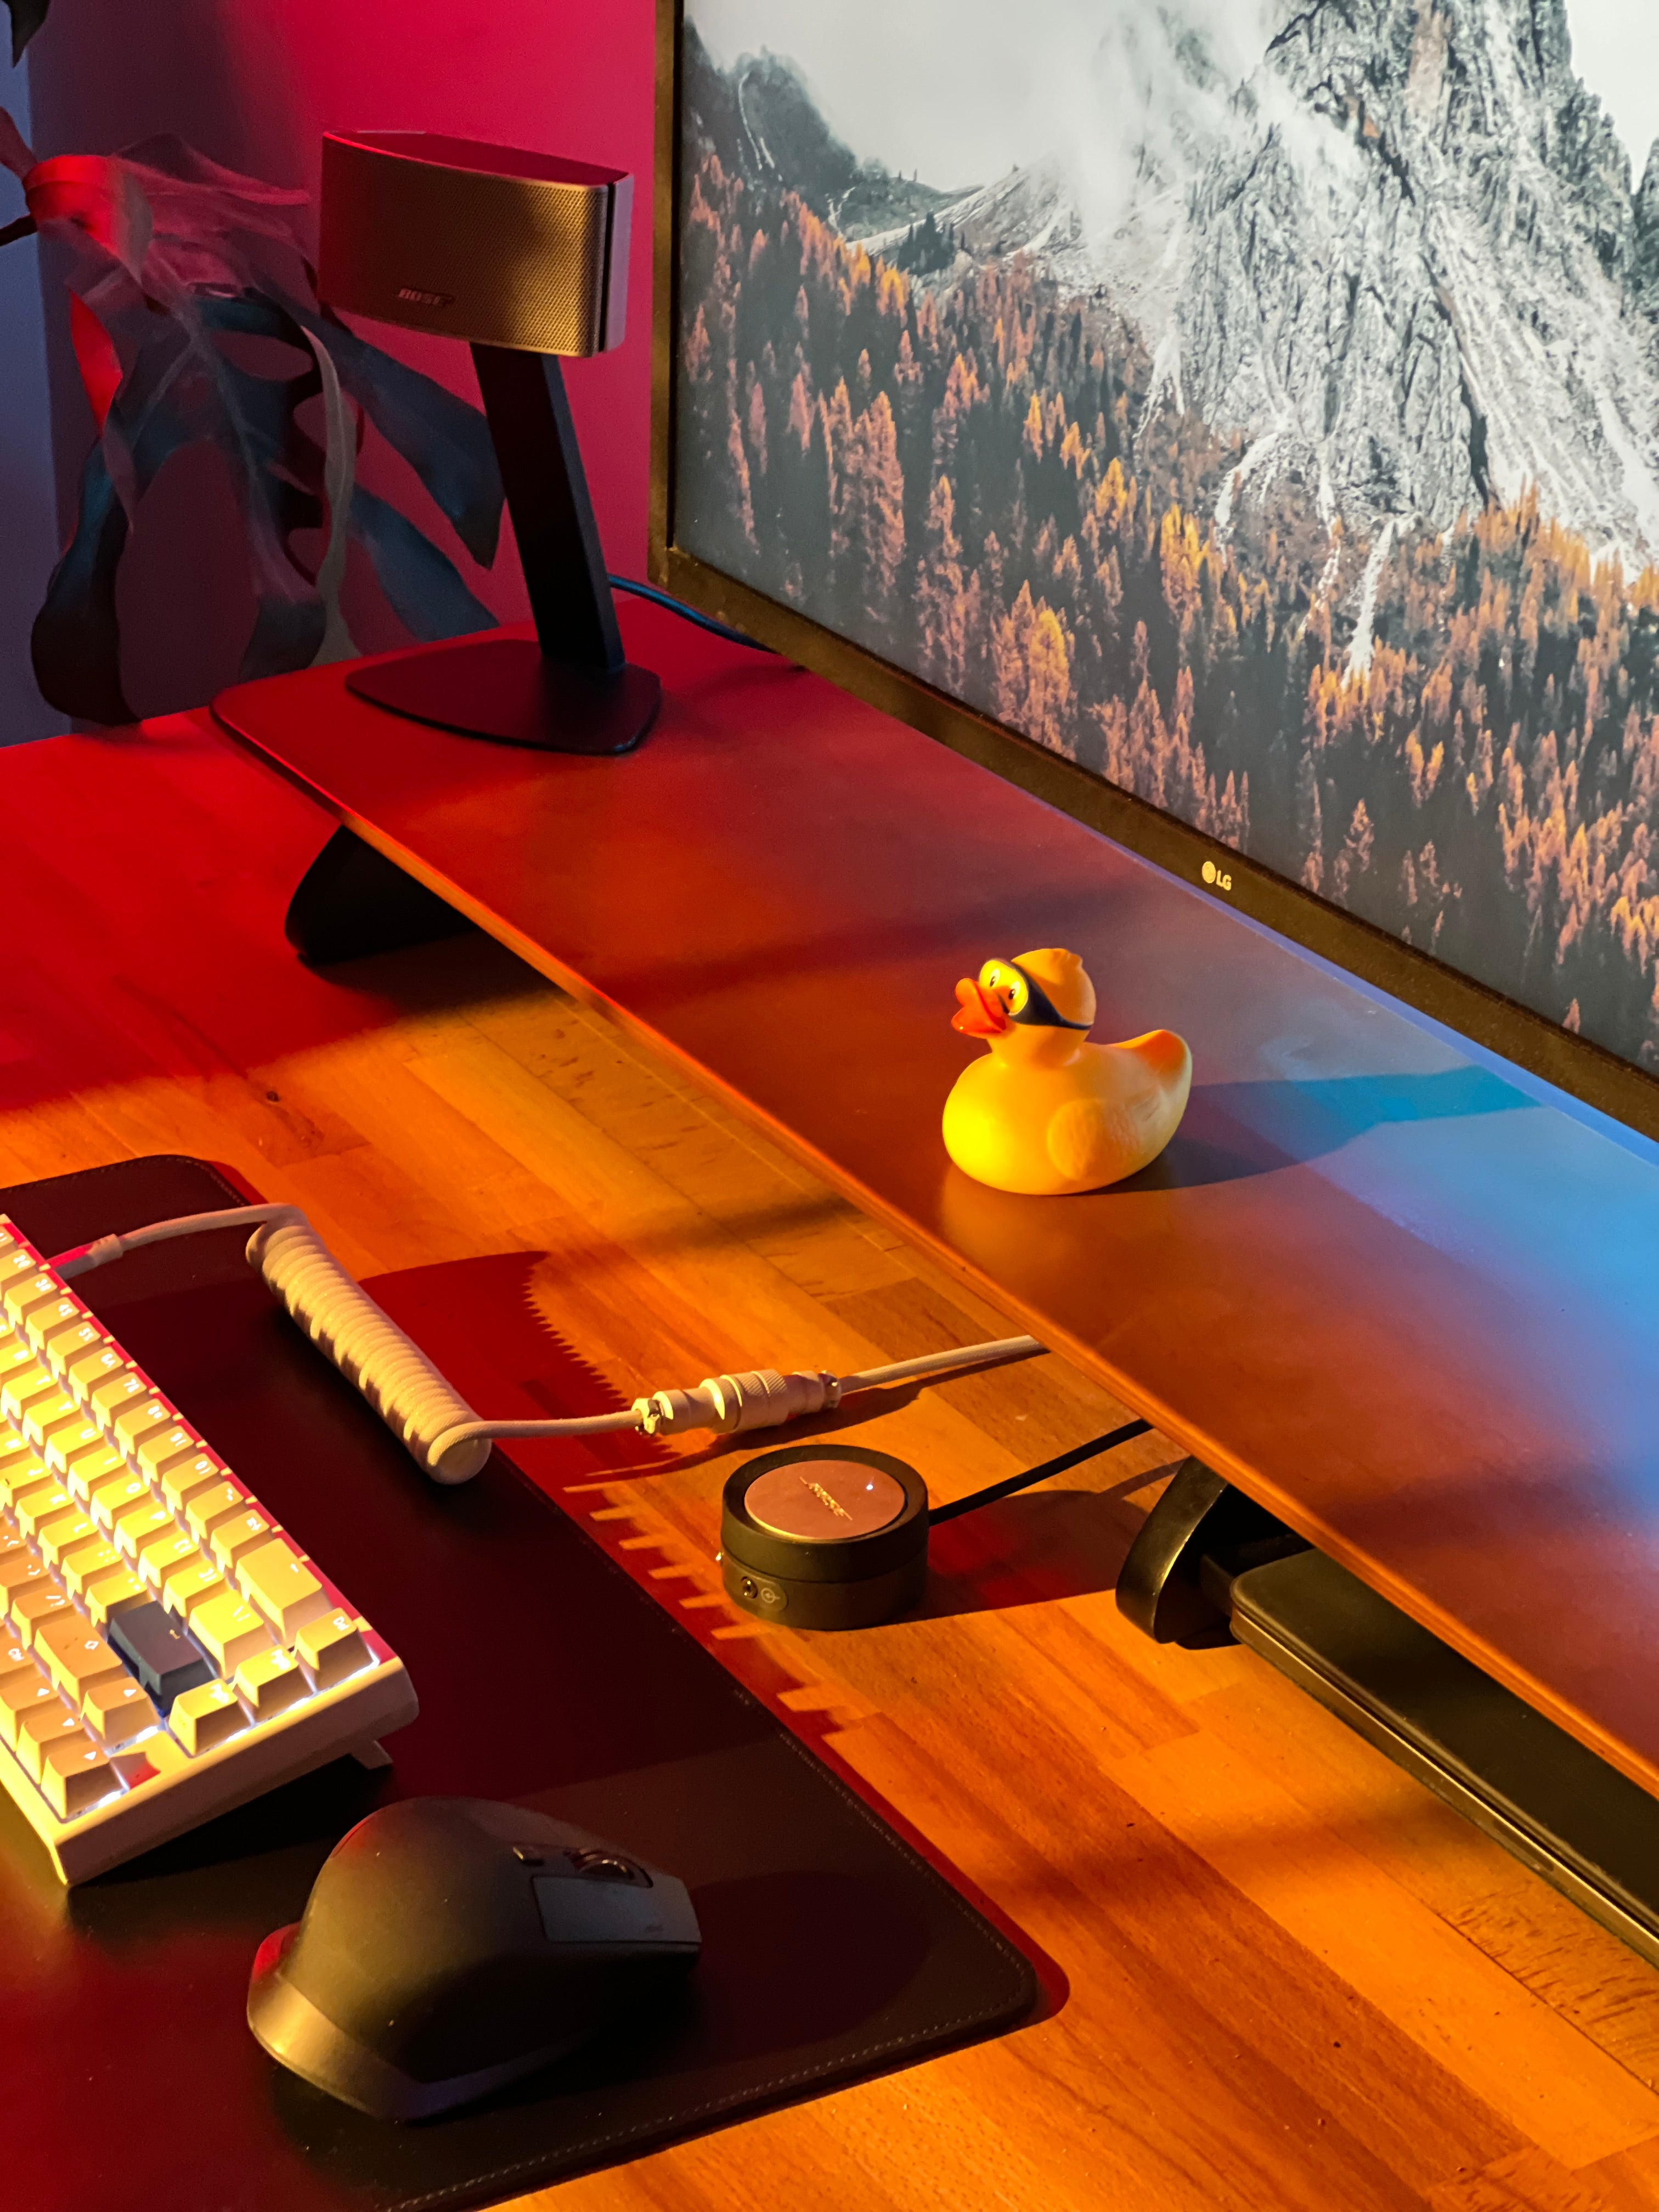 Modern wooden desk shelf by woodsy with mechanical keyboard, ergonomic mouse, desk lamp, mountain wallpaper, and rubber duck."